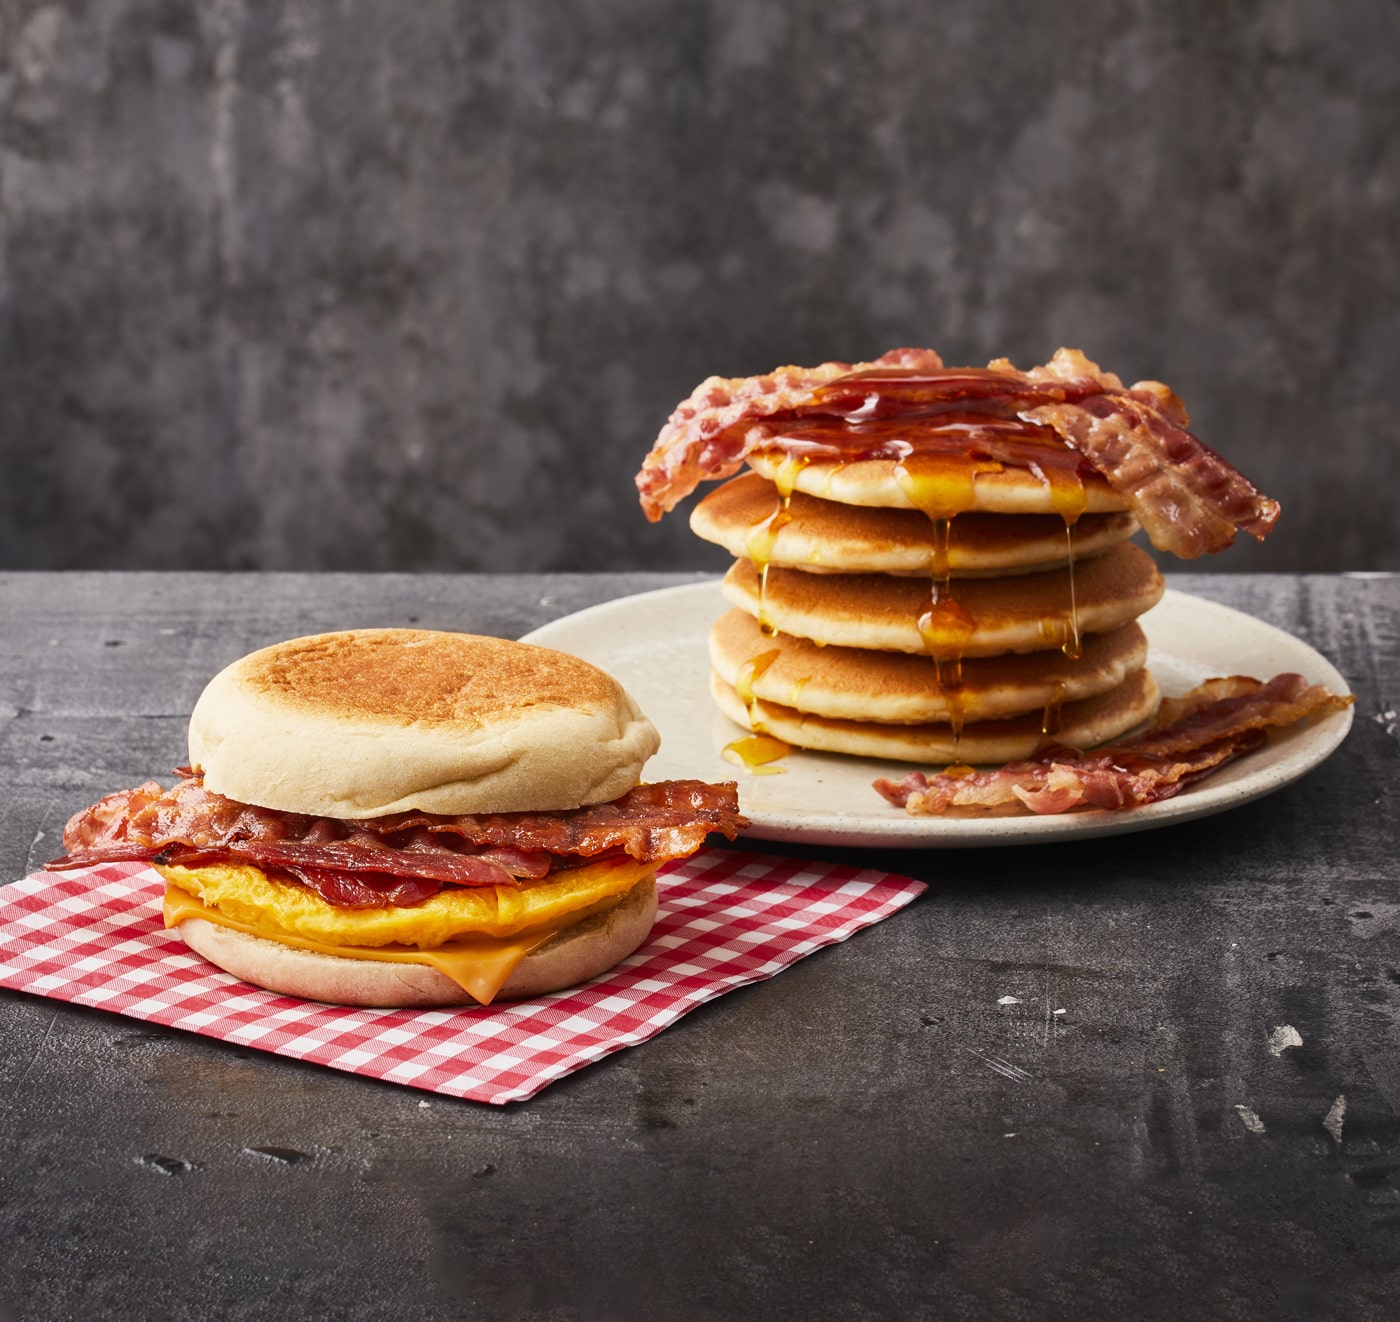 Discover: Breakfast Muffin & Pancakes with Bacon